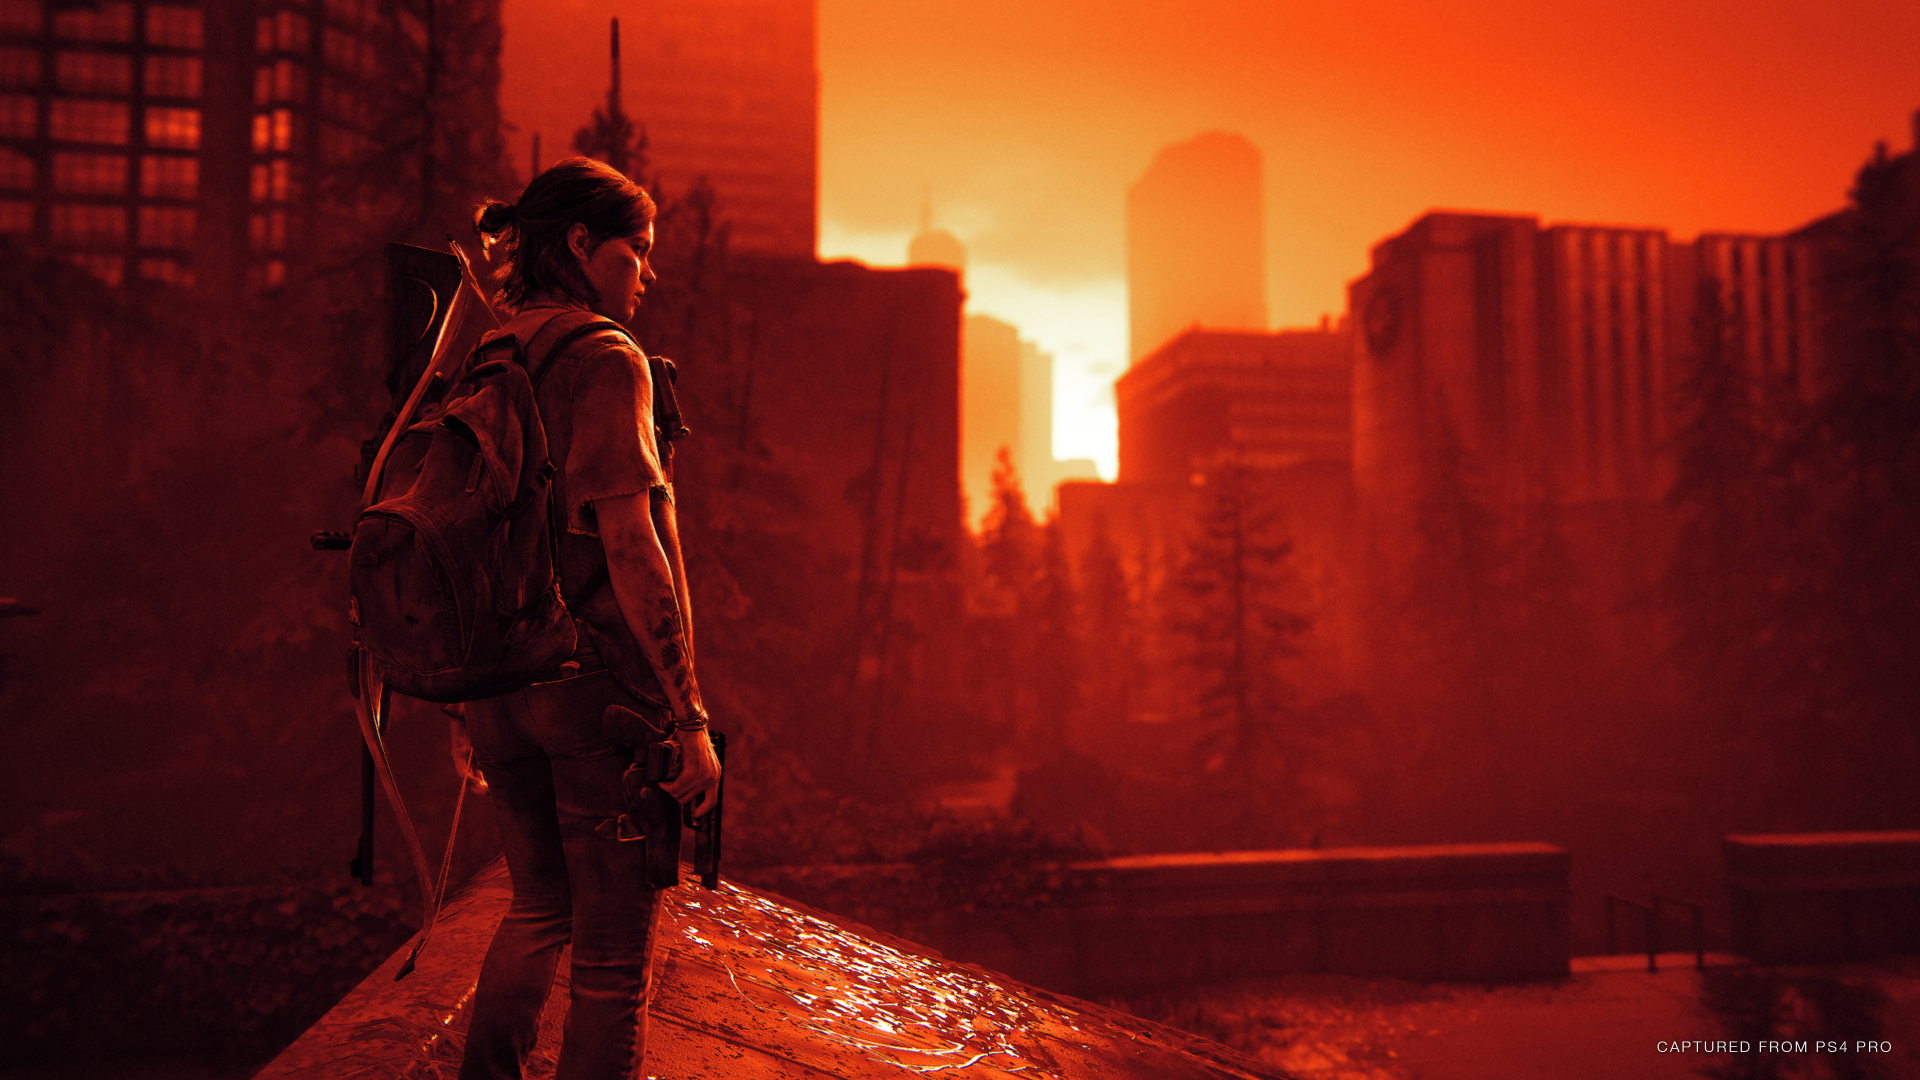 The Last Of Us 2 Wallpaper 1920x1080 Clearance Prices Save 55 